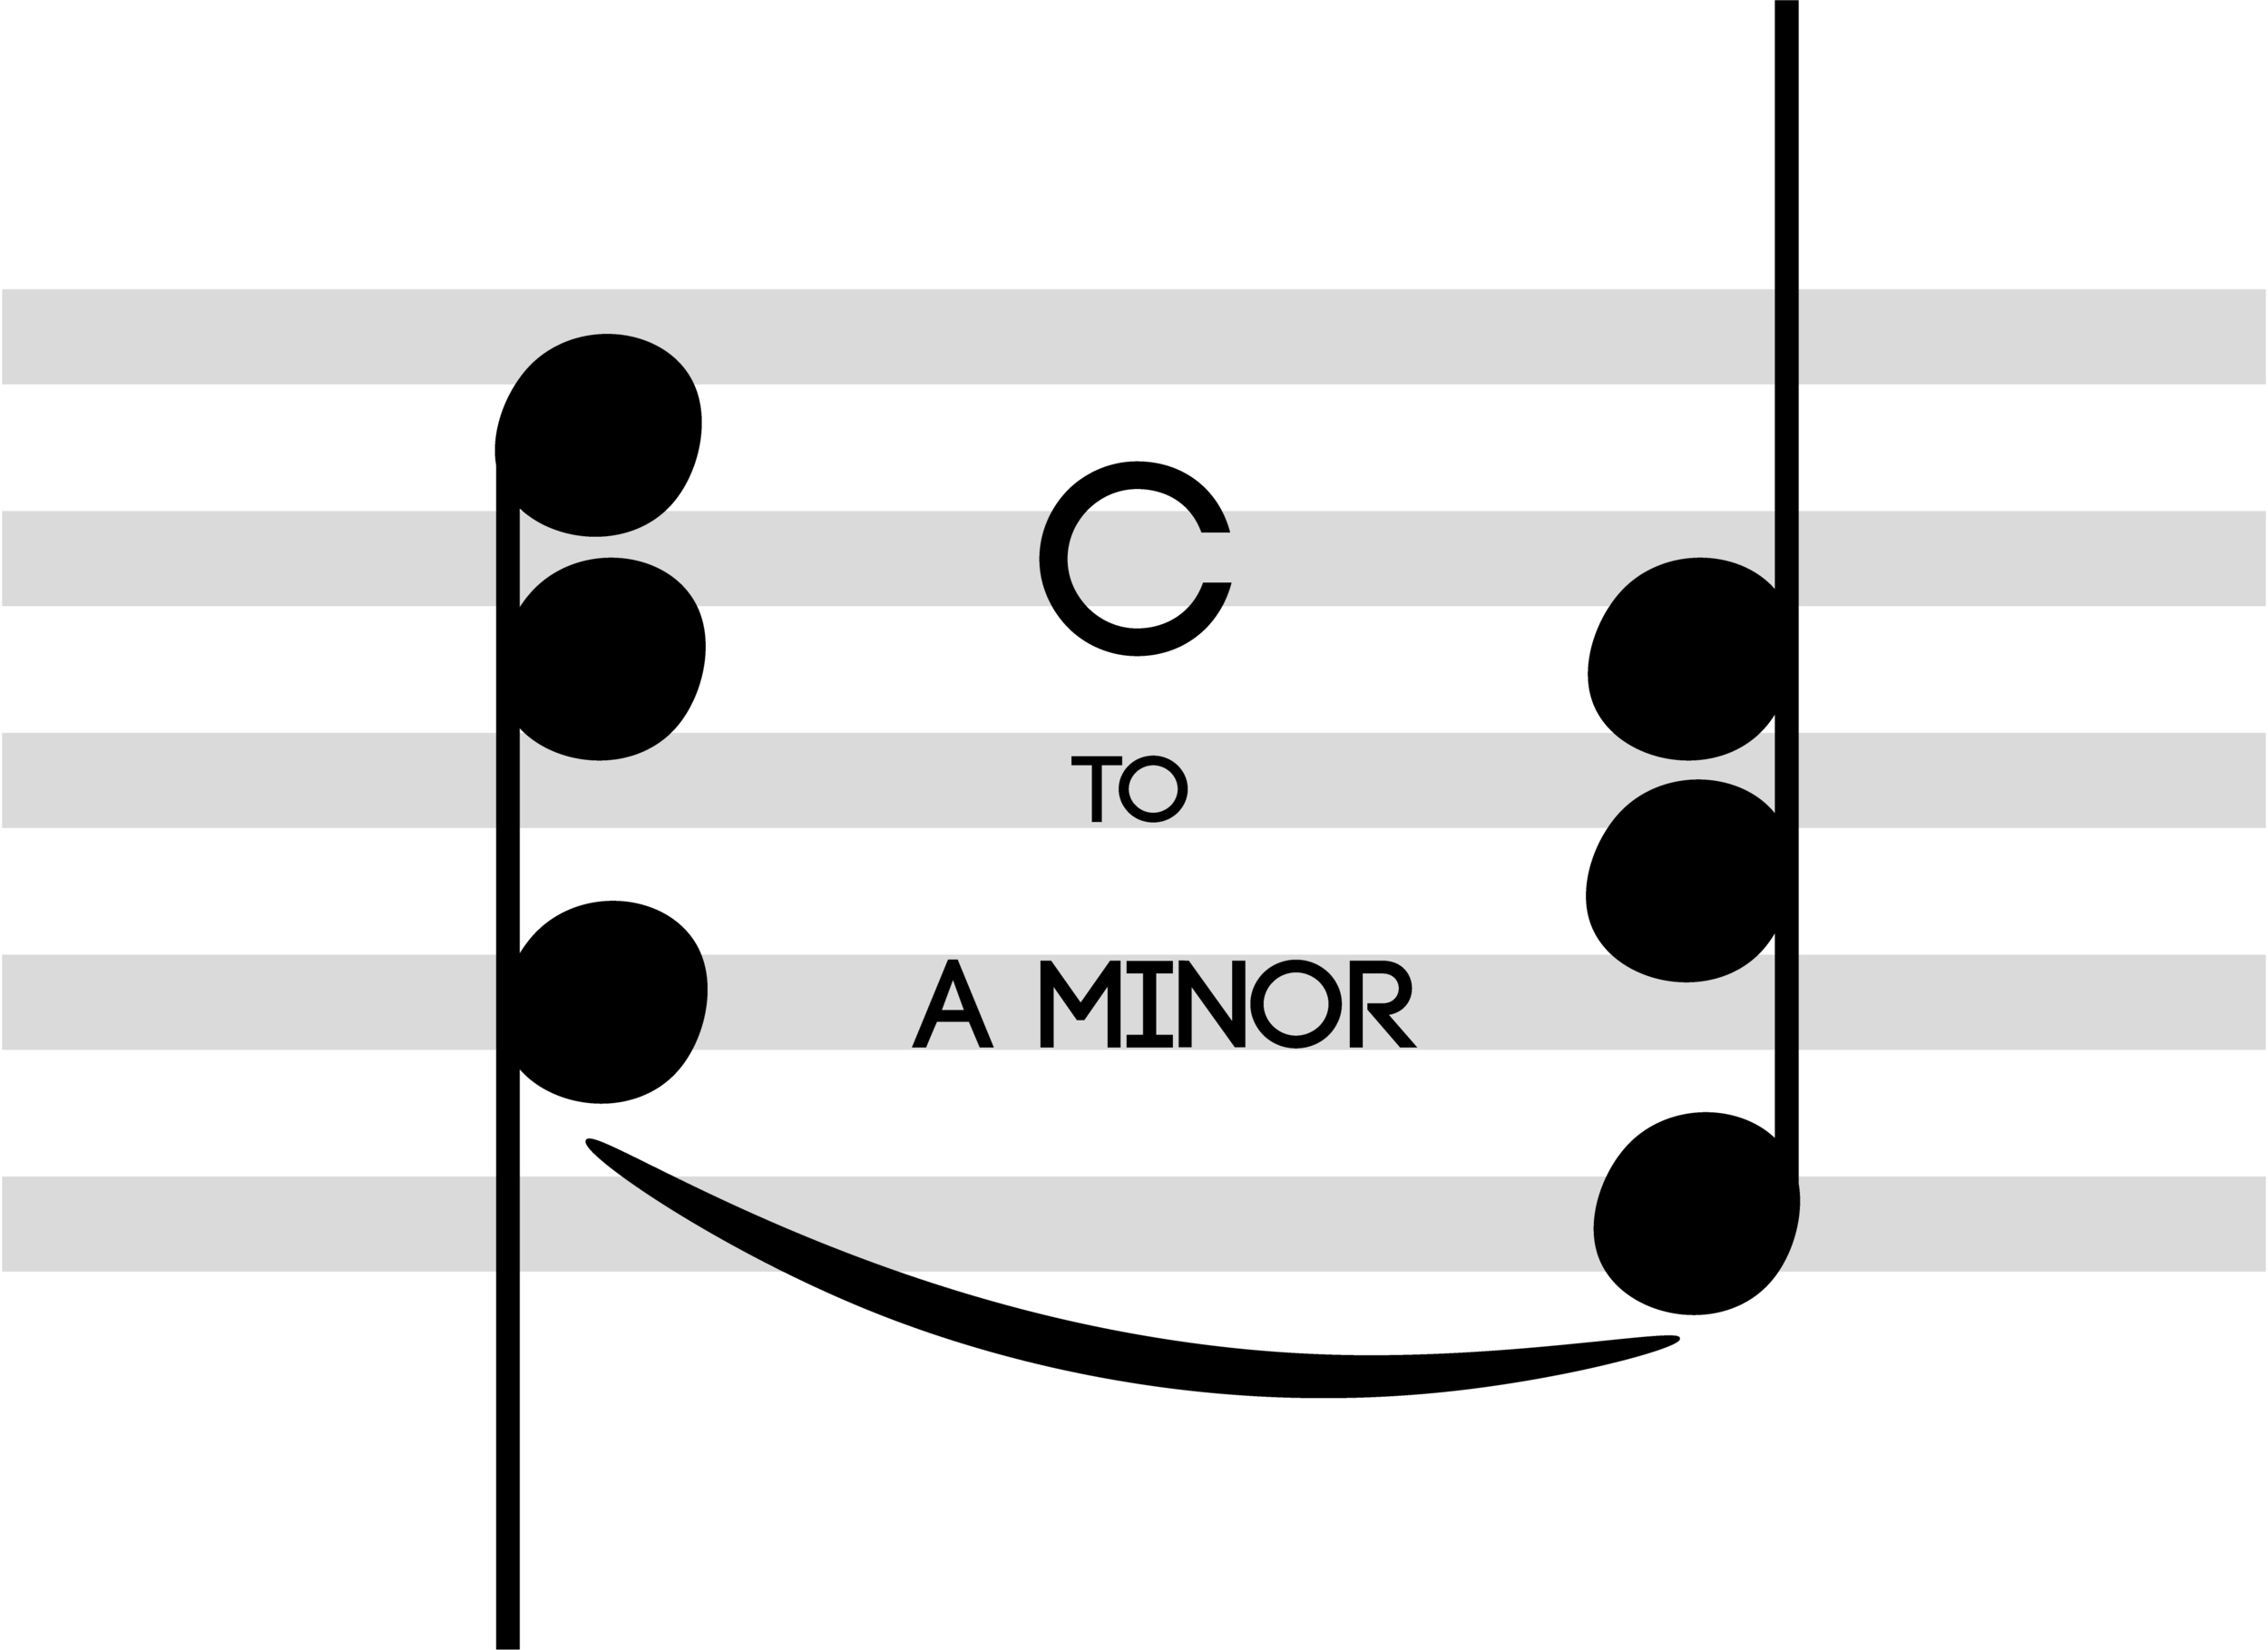 C to A minor